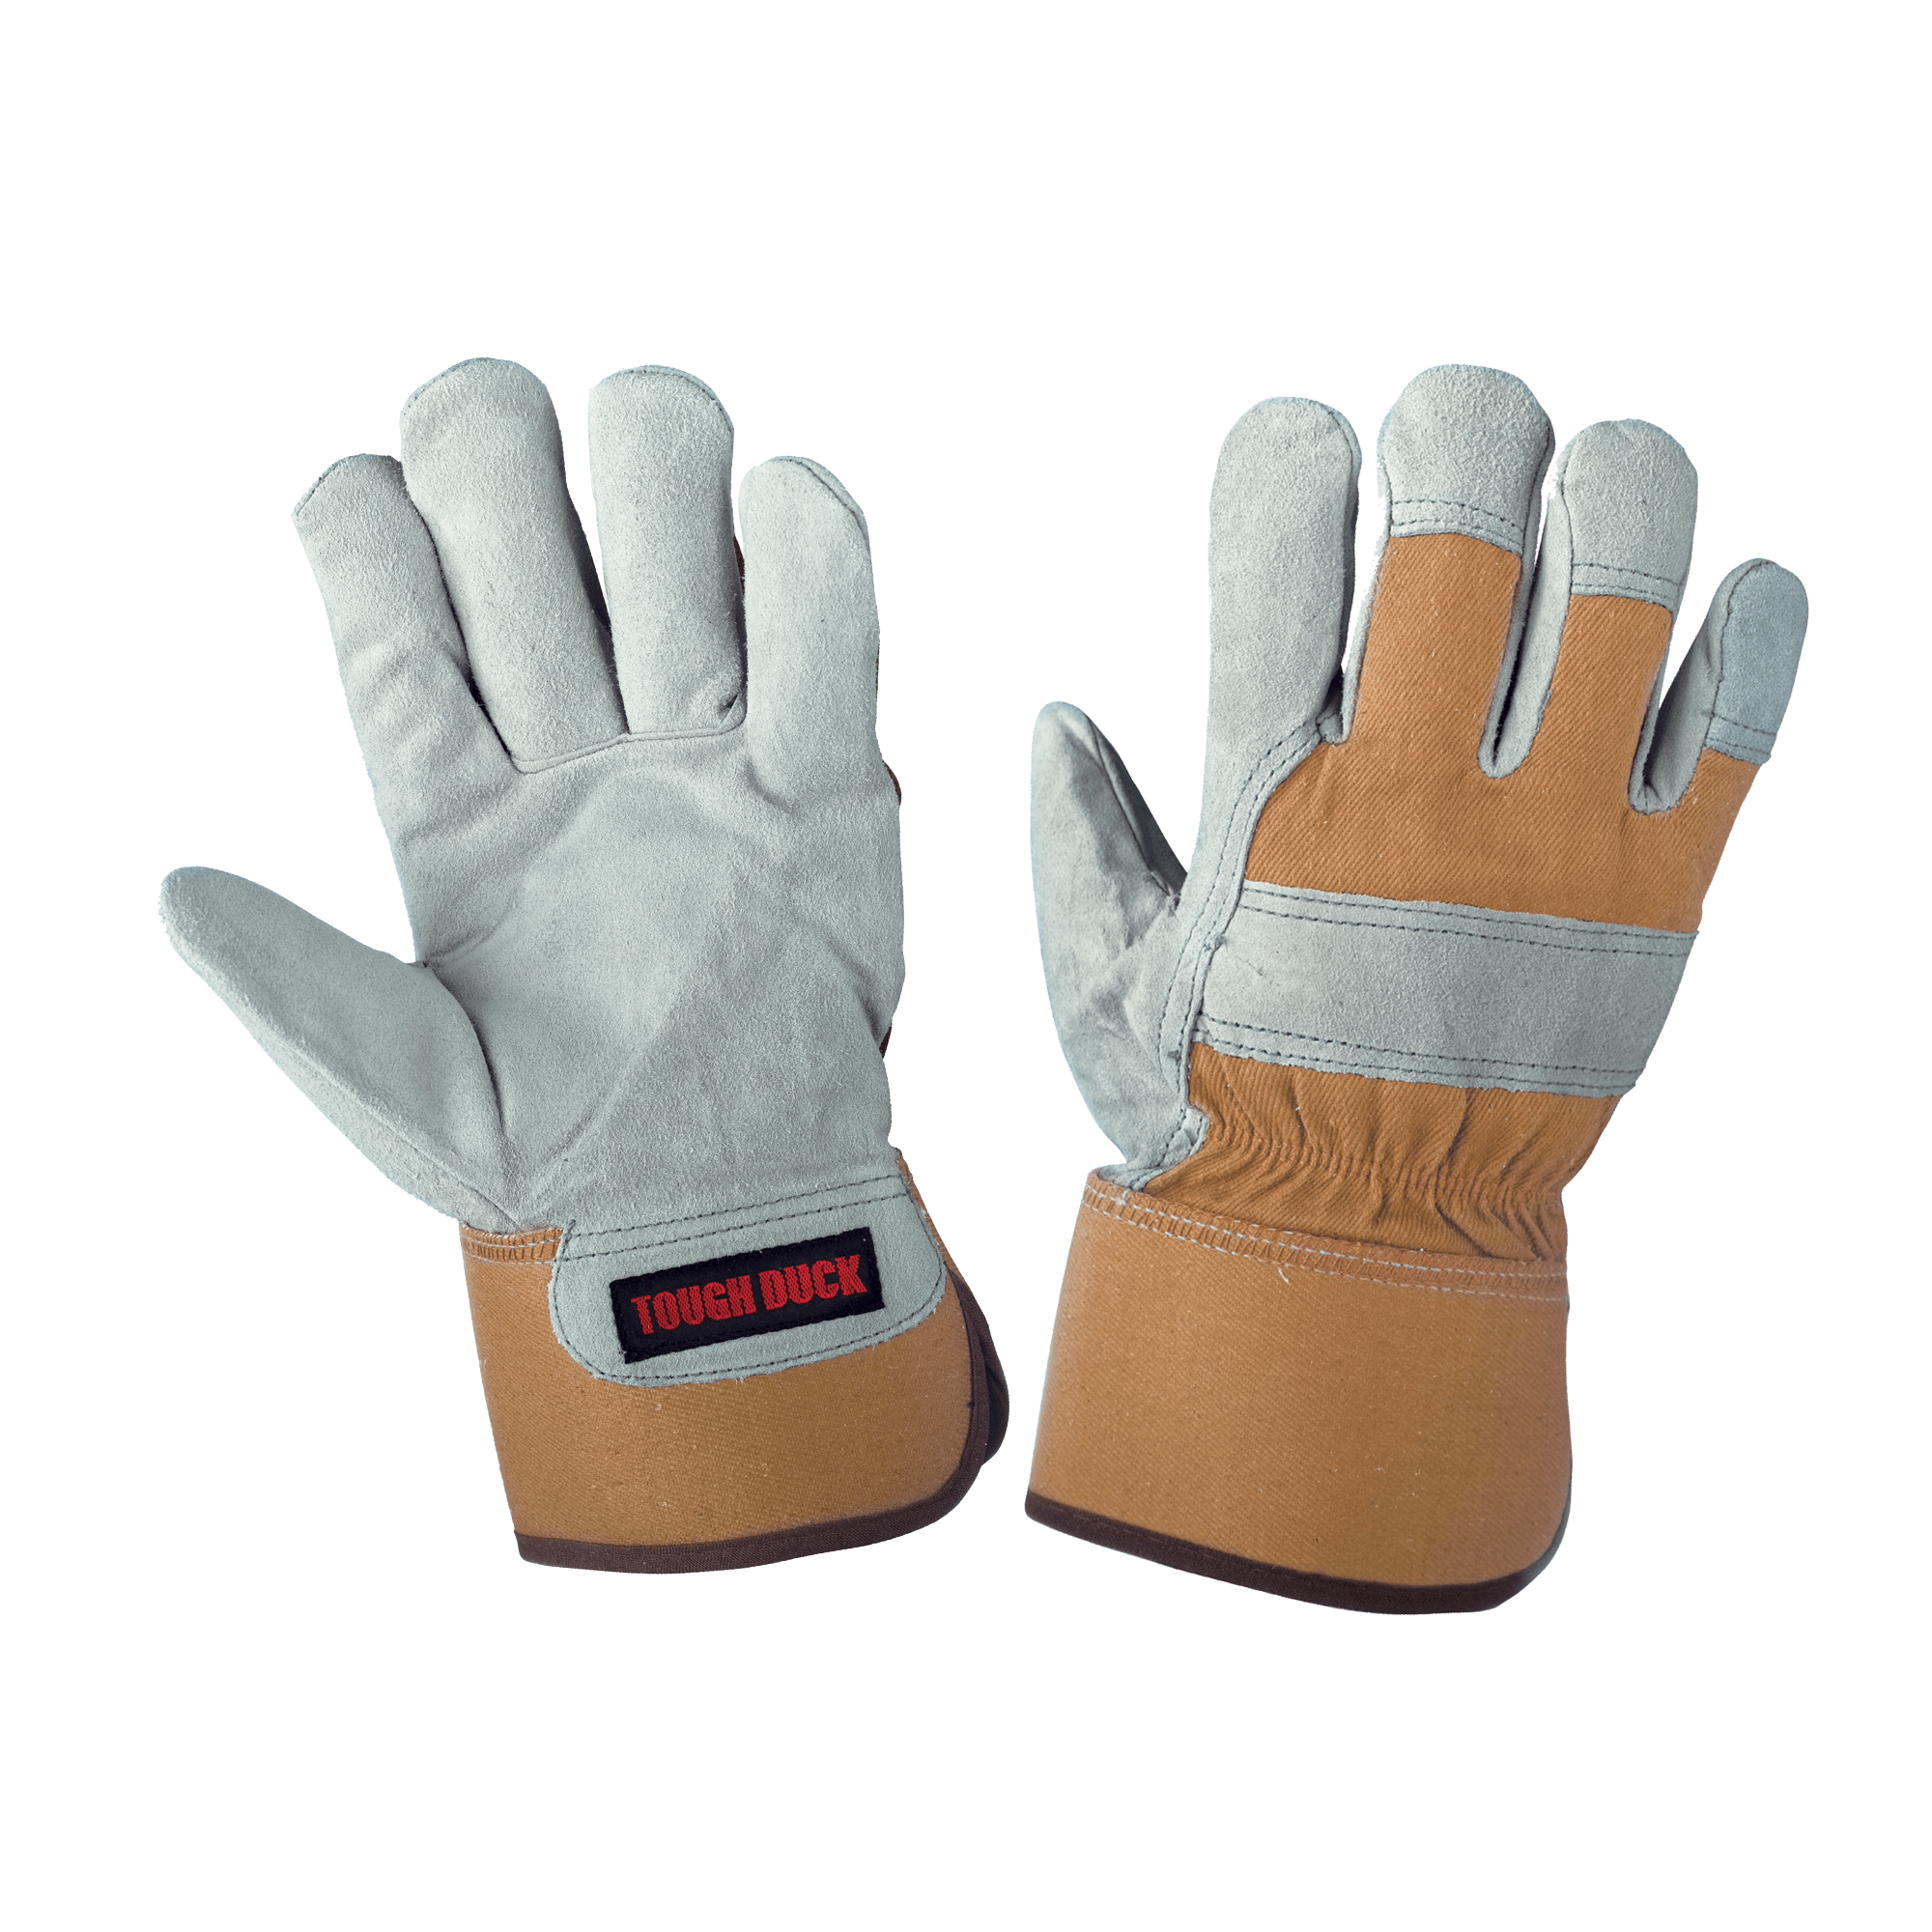 Safe Handler Deluxe Work Gloves | Single Palm Split Leather, 3 Rubber Cuff, Cowhide Leather, Inner Cotton lining, Rubberized Safety Cuff, Grade A